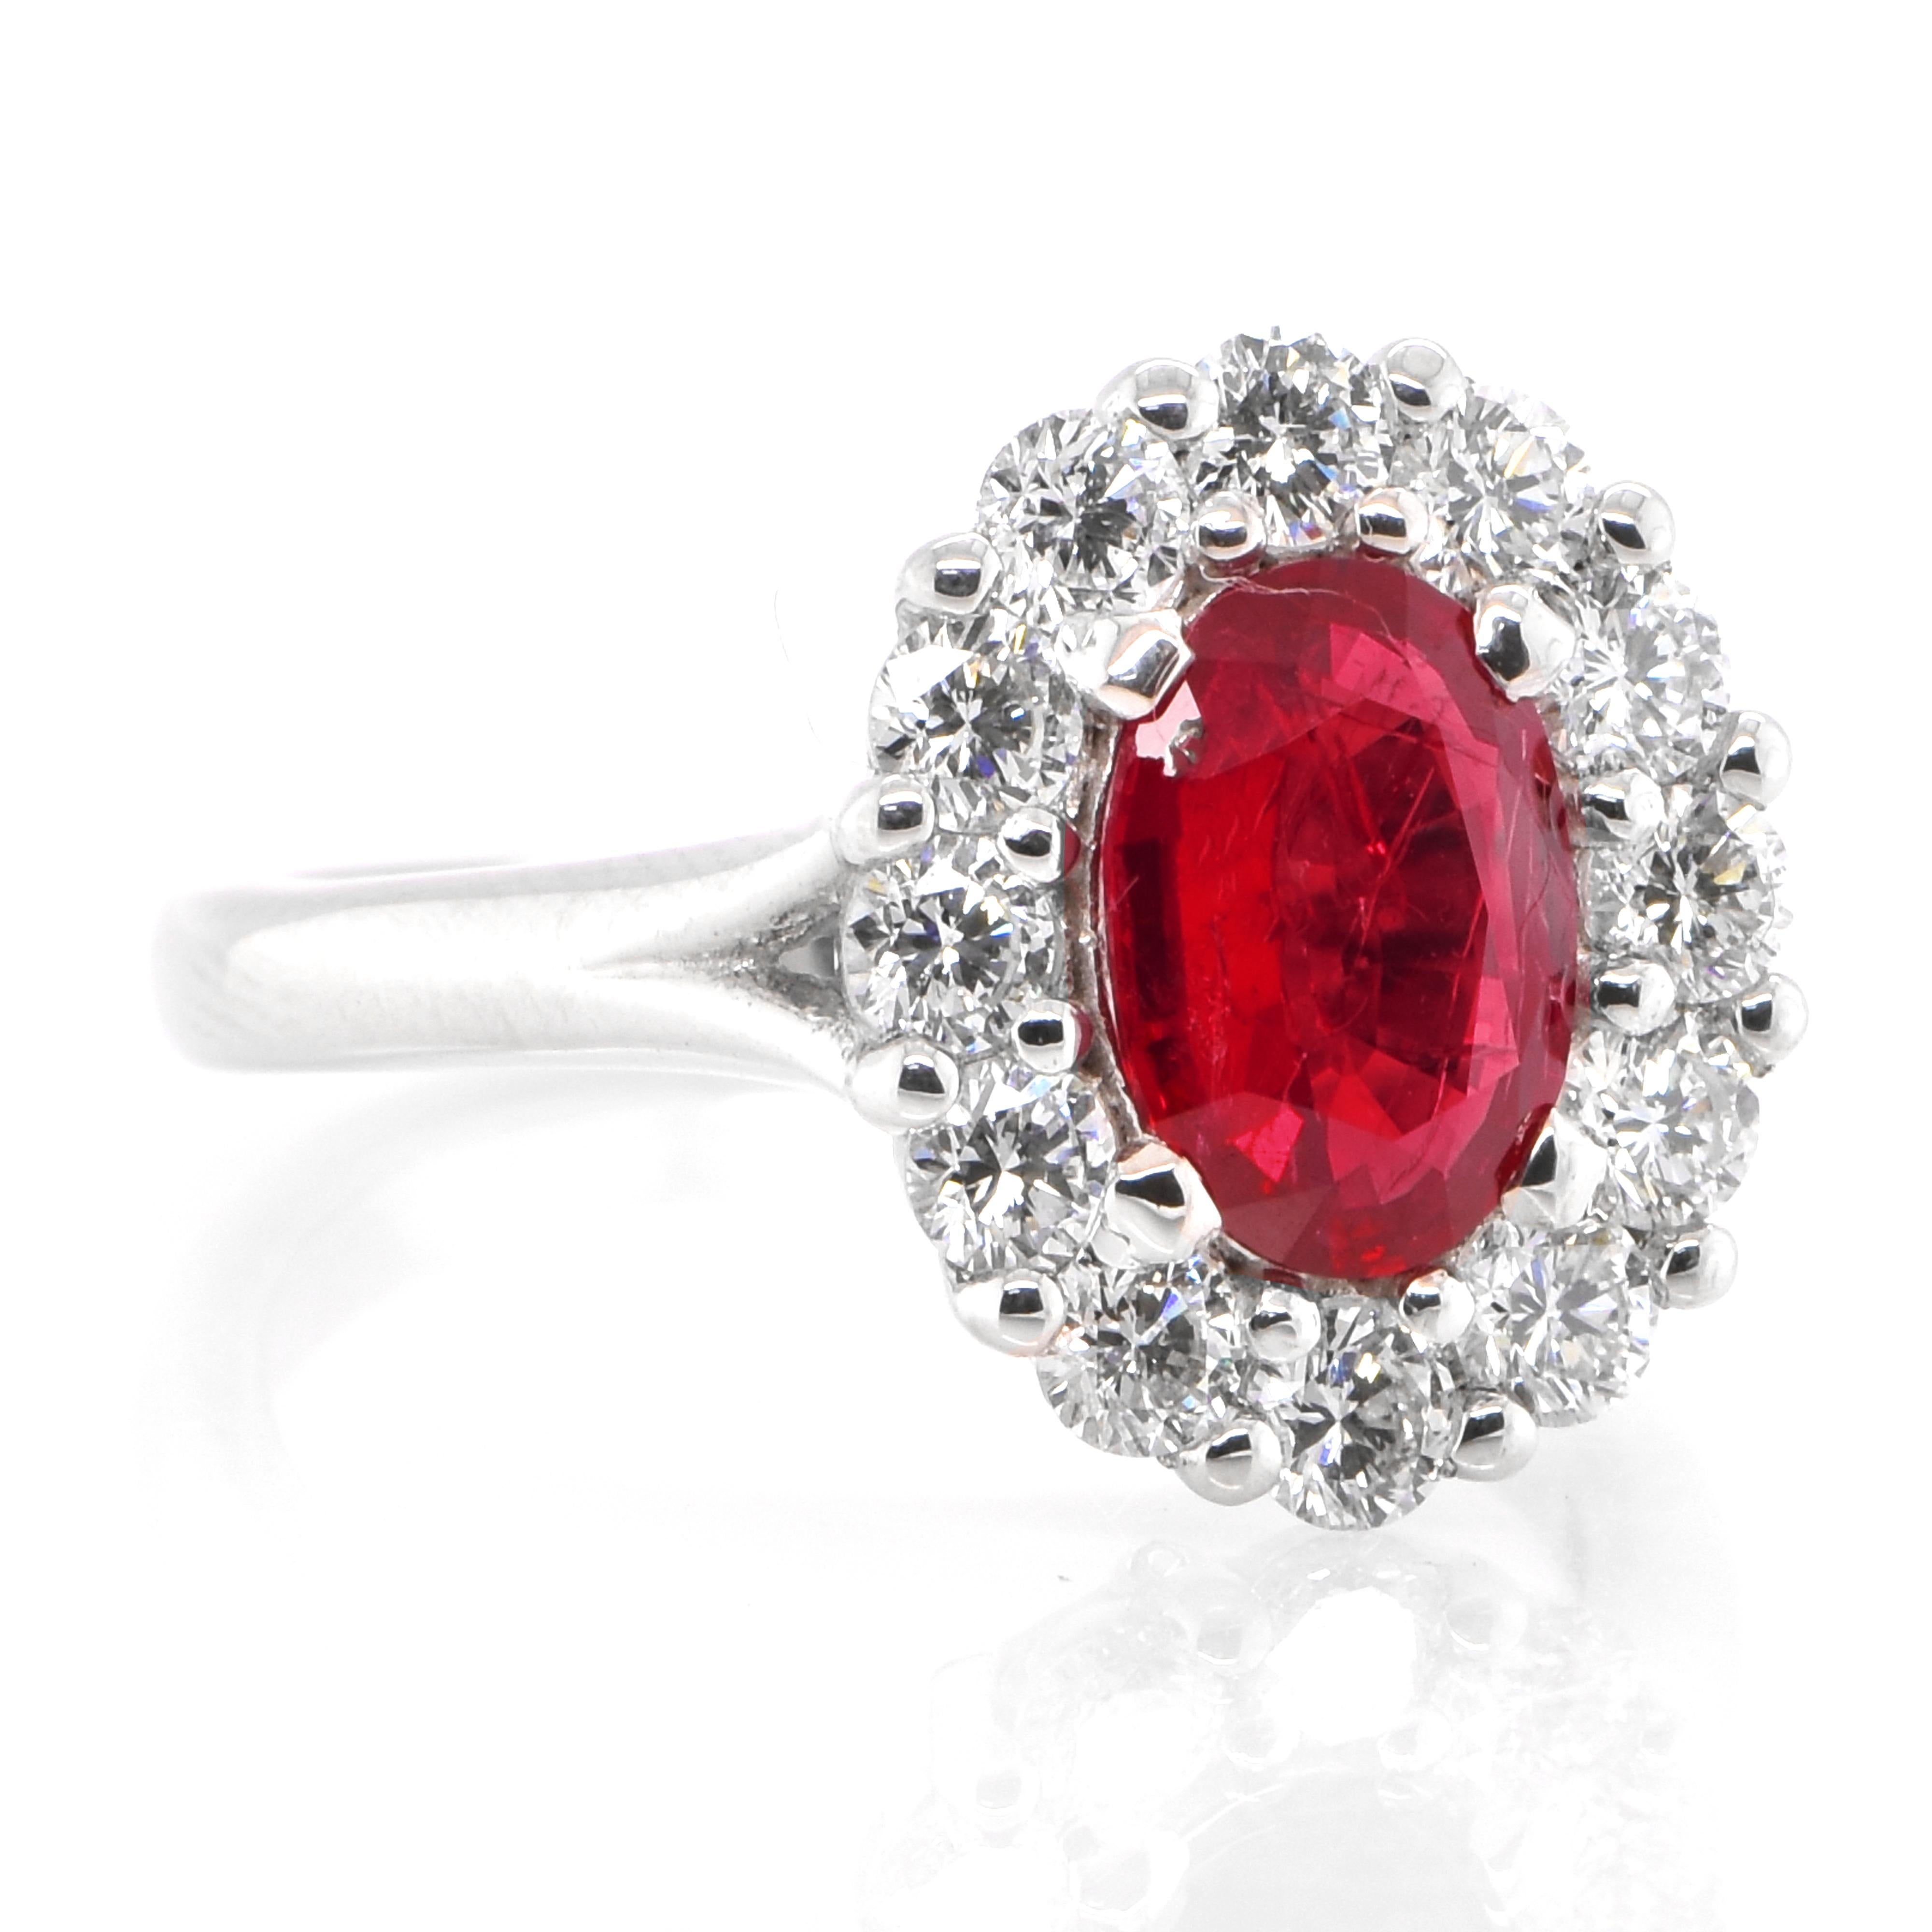 Modern GRS Certified 1.51 Carat Unheated Pigeon's Blood Color Ruby Ring Set in Platinum